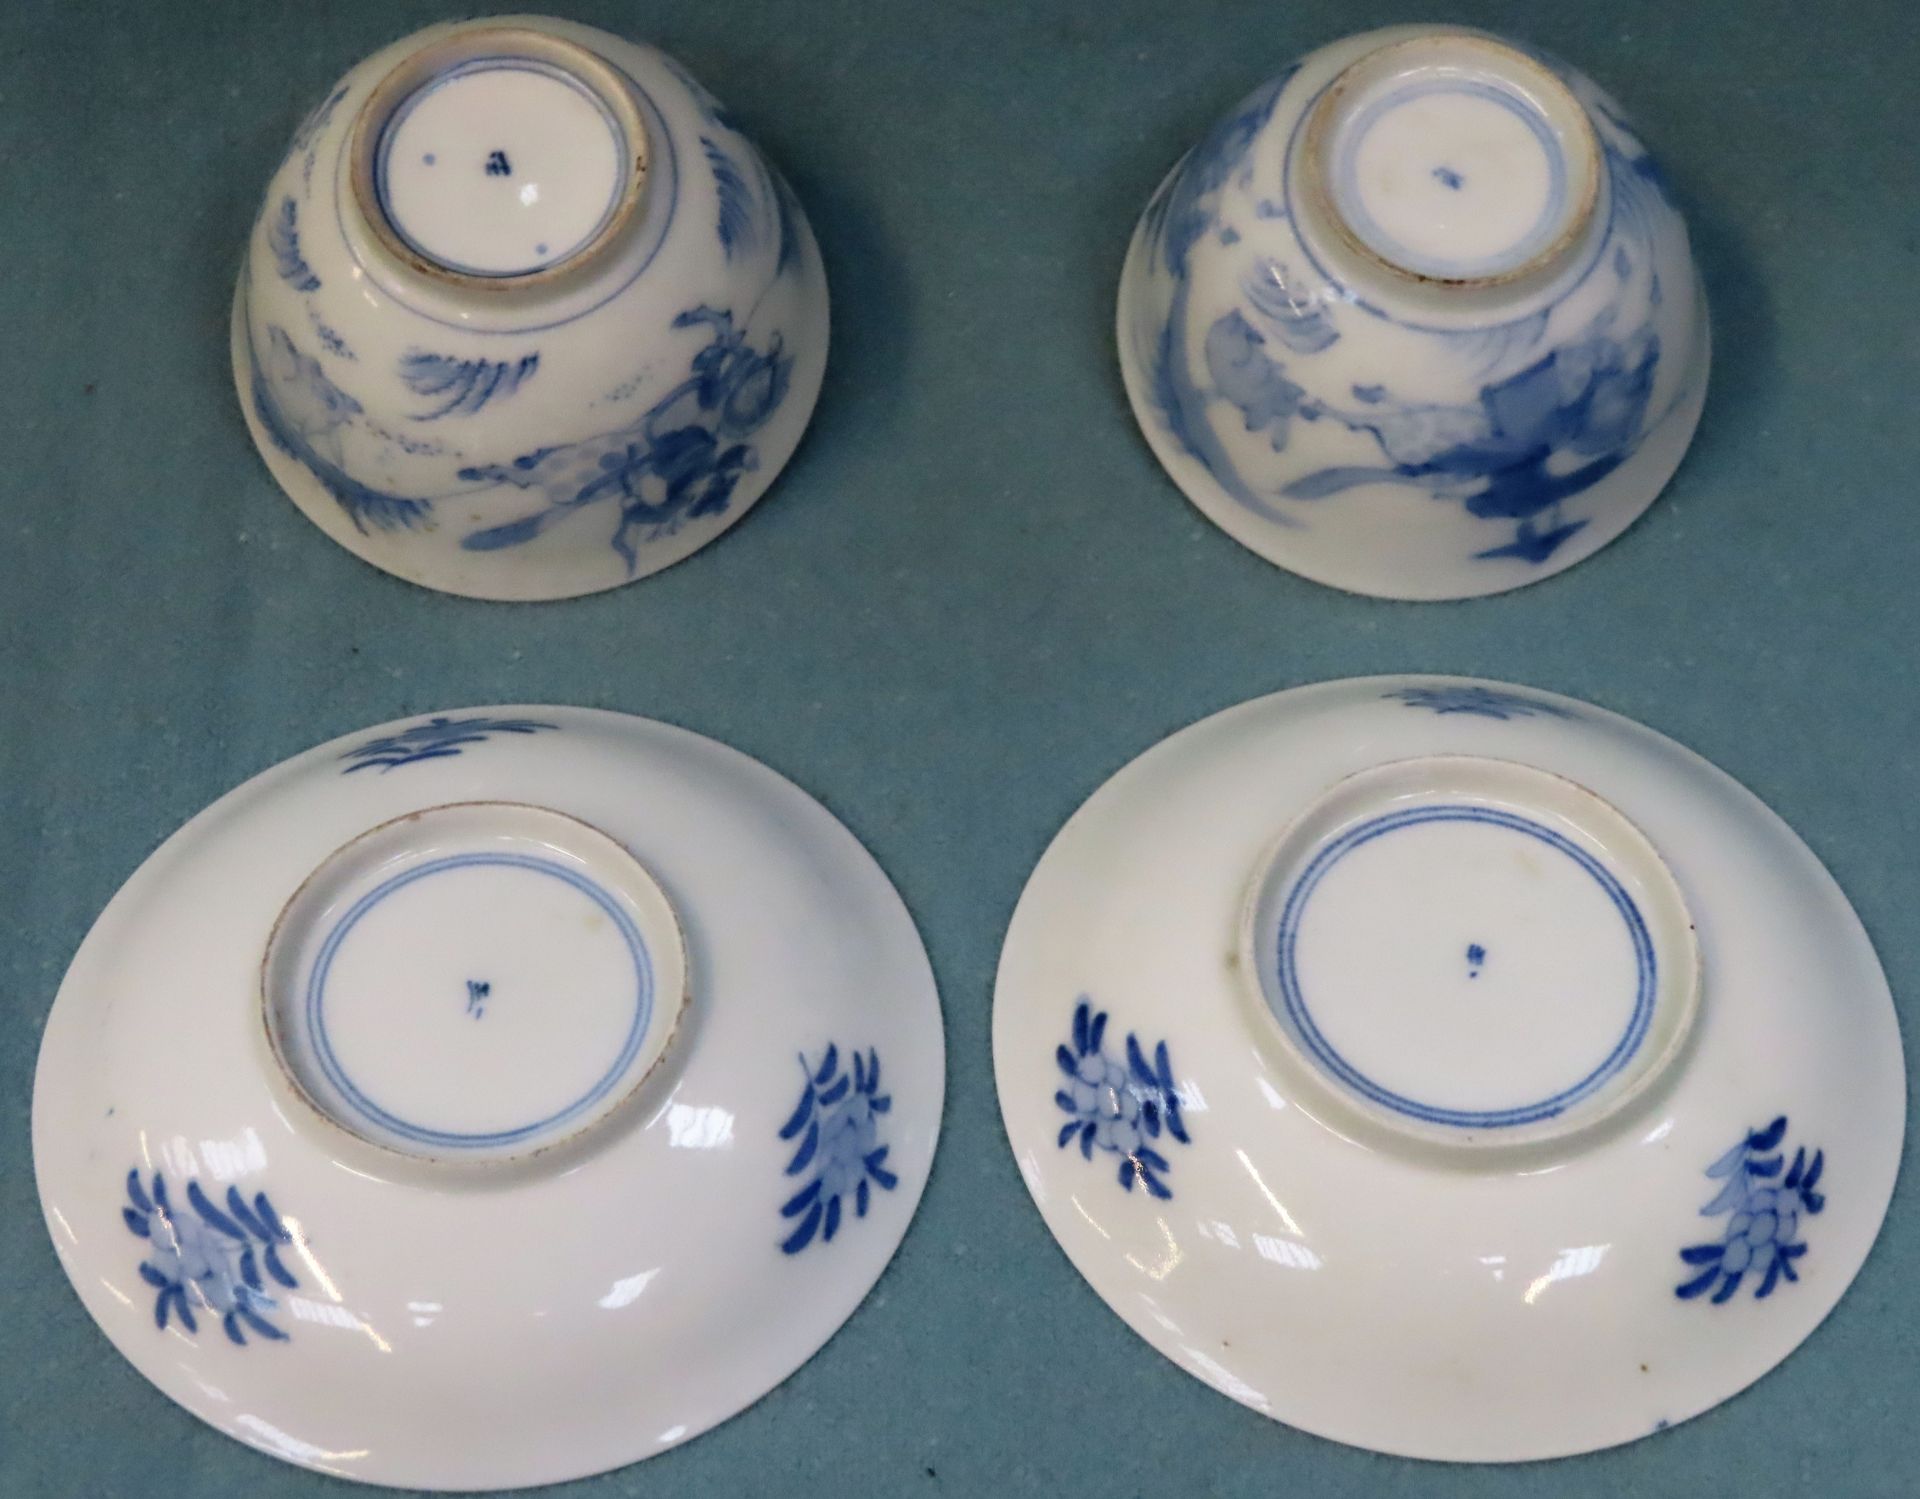 Two similar Oriental blue and white glazed ceramic tea bowls and saucers reasonable used condition - Image 3 of 3